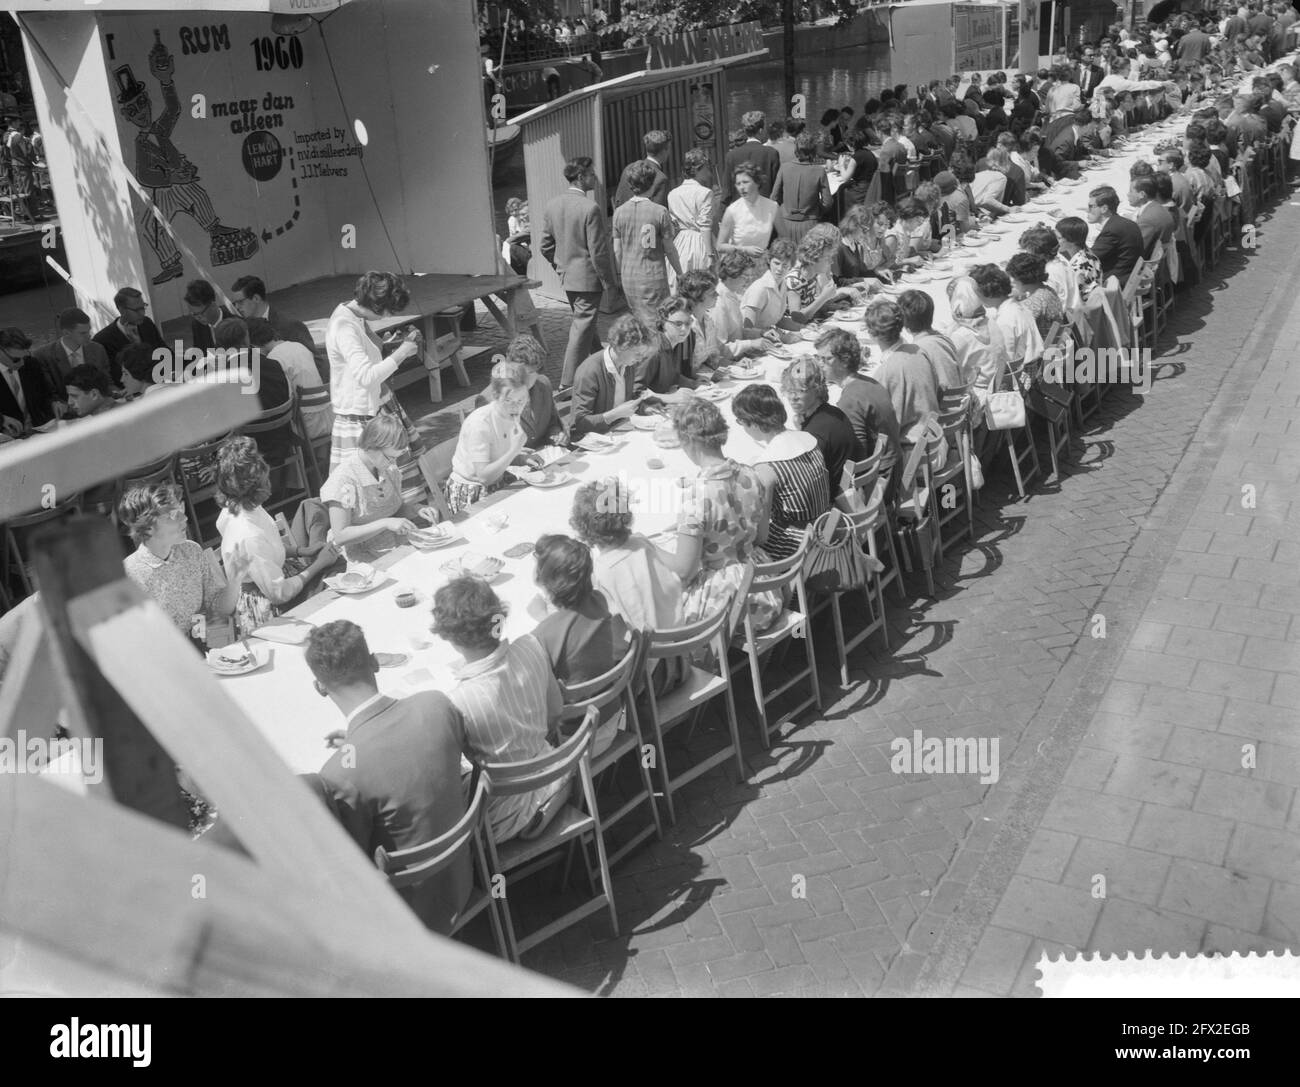 Lunch of 2000 students with Princess Beatrix Leiden, June 15, 1960, STUDENTS, lunches, The Netherlands, 20th century press agency photo, news to remember, documentary, historic photography 1945-1990, visual stories, human history of the Twentieth Century, capturing moments in time Stock Photo